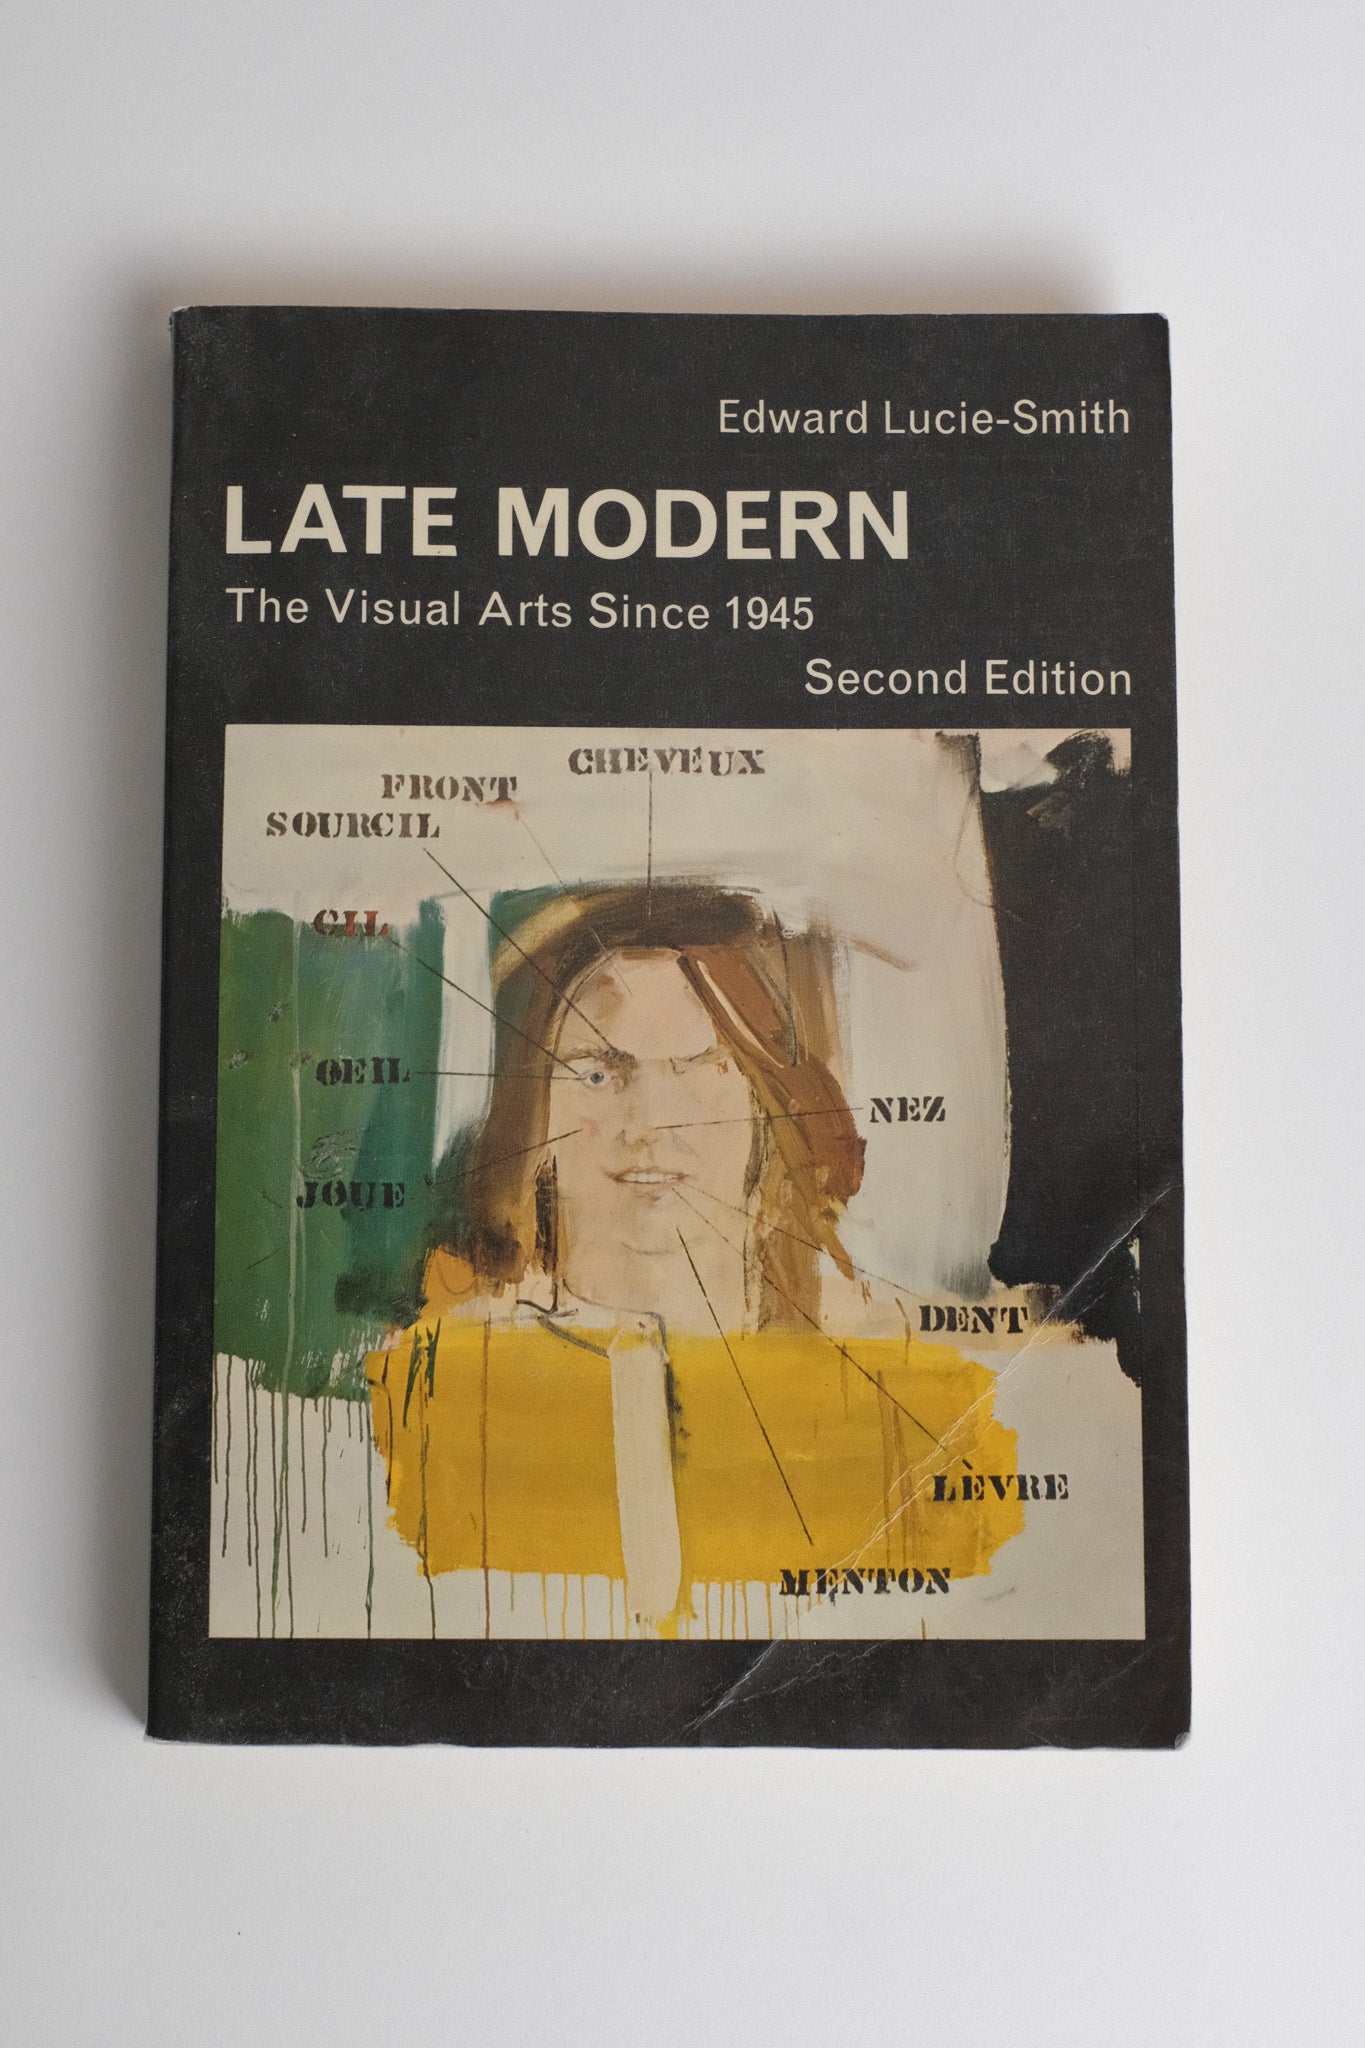 Late Modern: The Visual Arts Since 1945 - Vintage